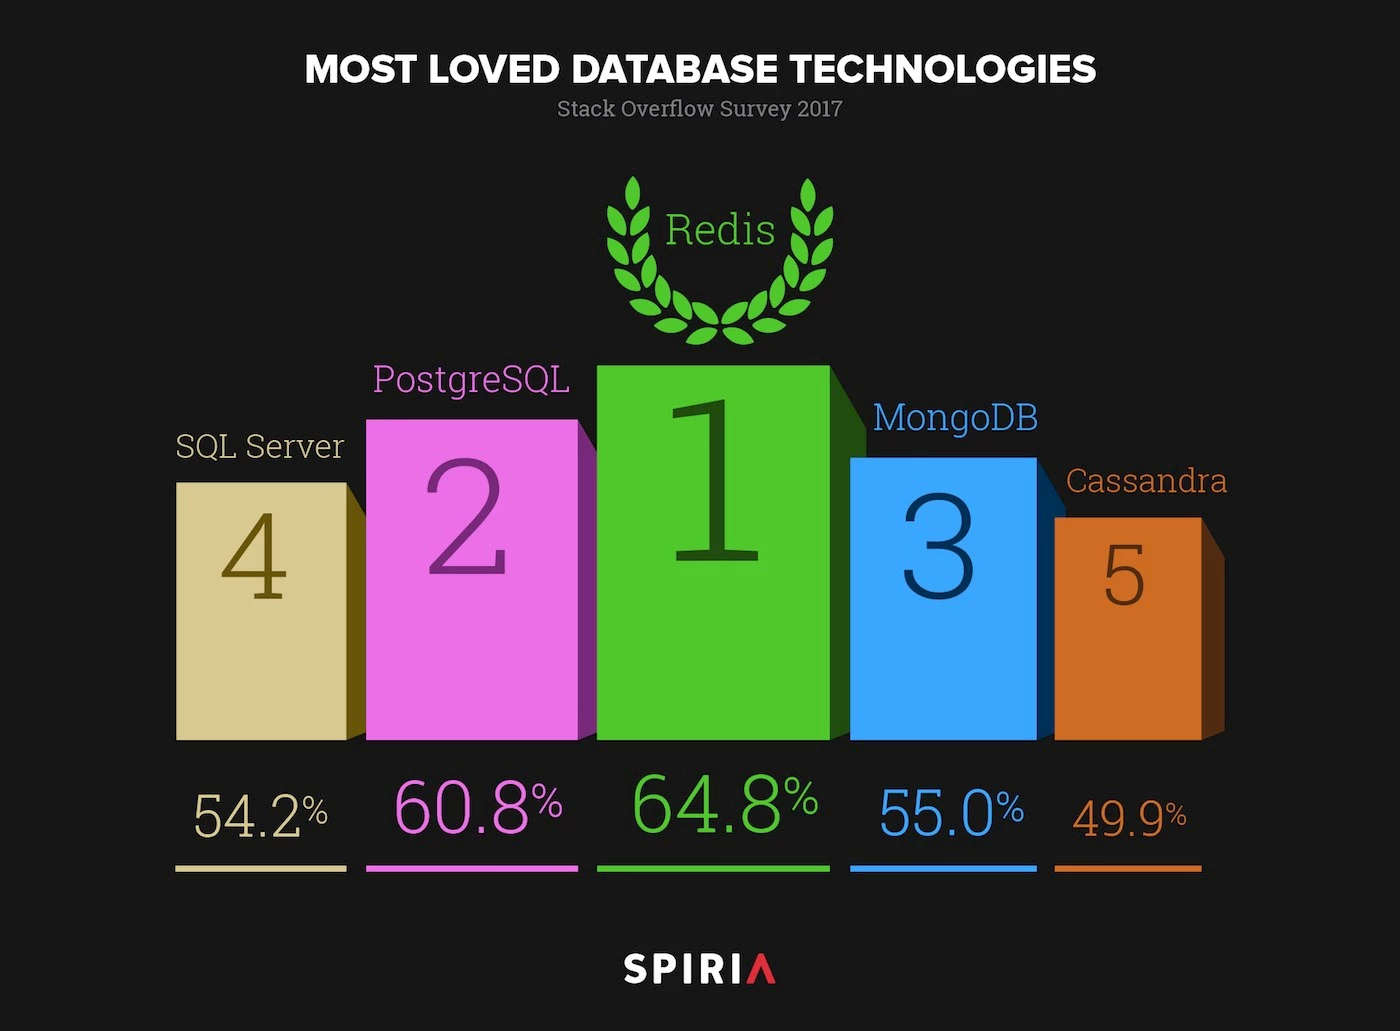 Most Loved Database Technologies, 2017